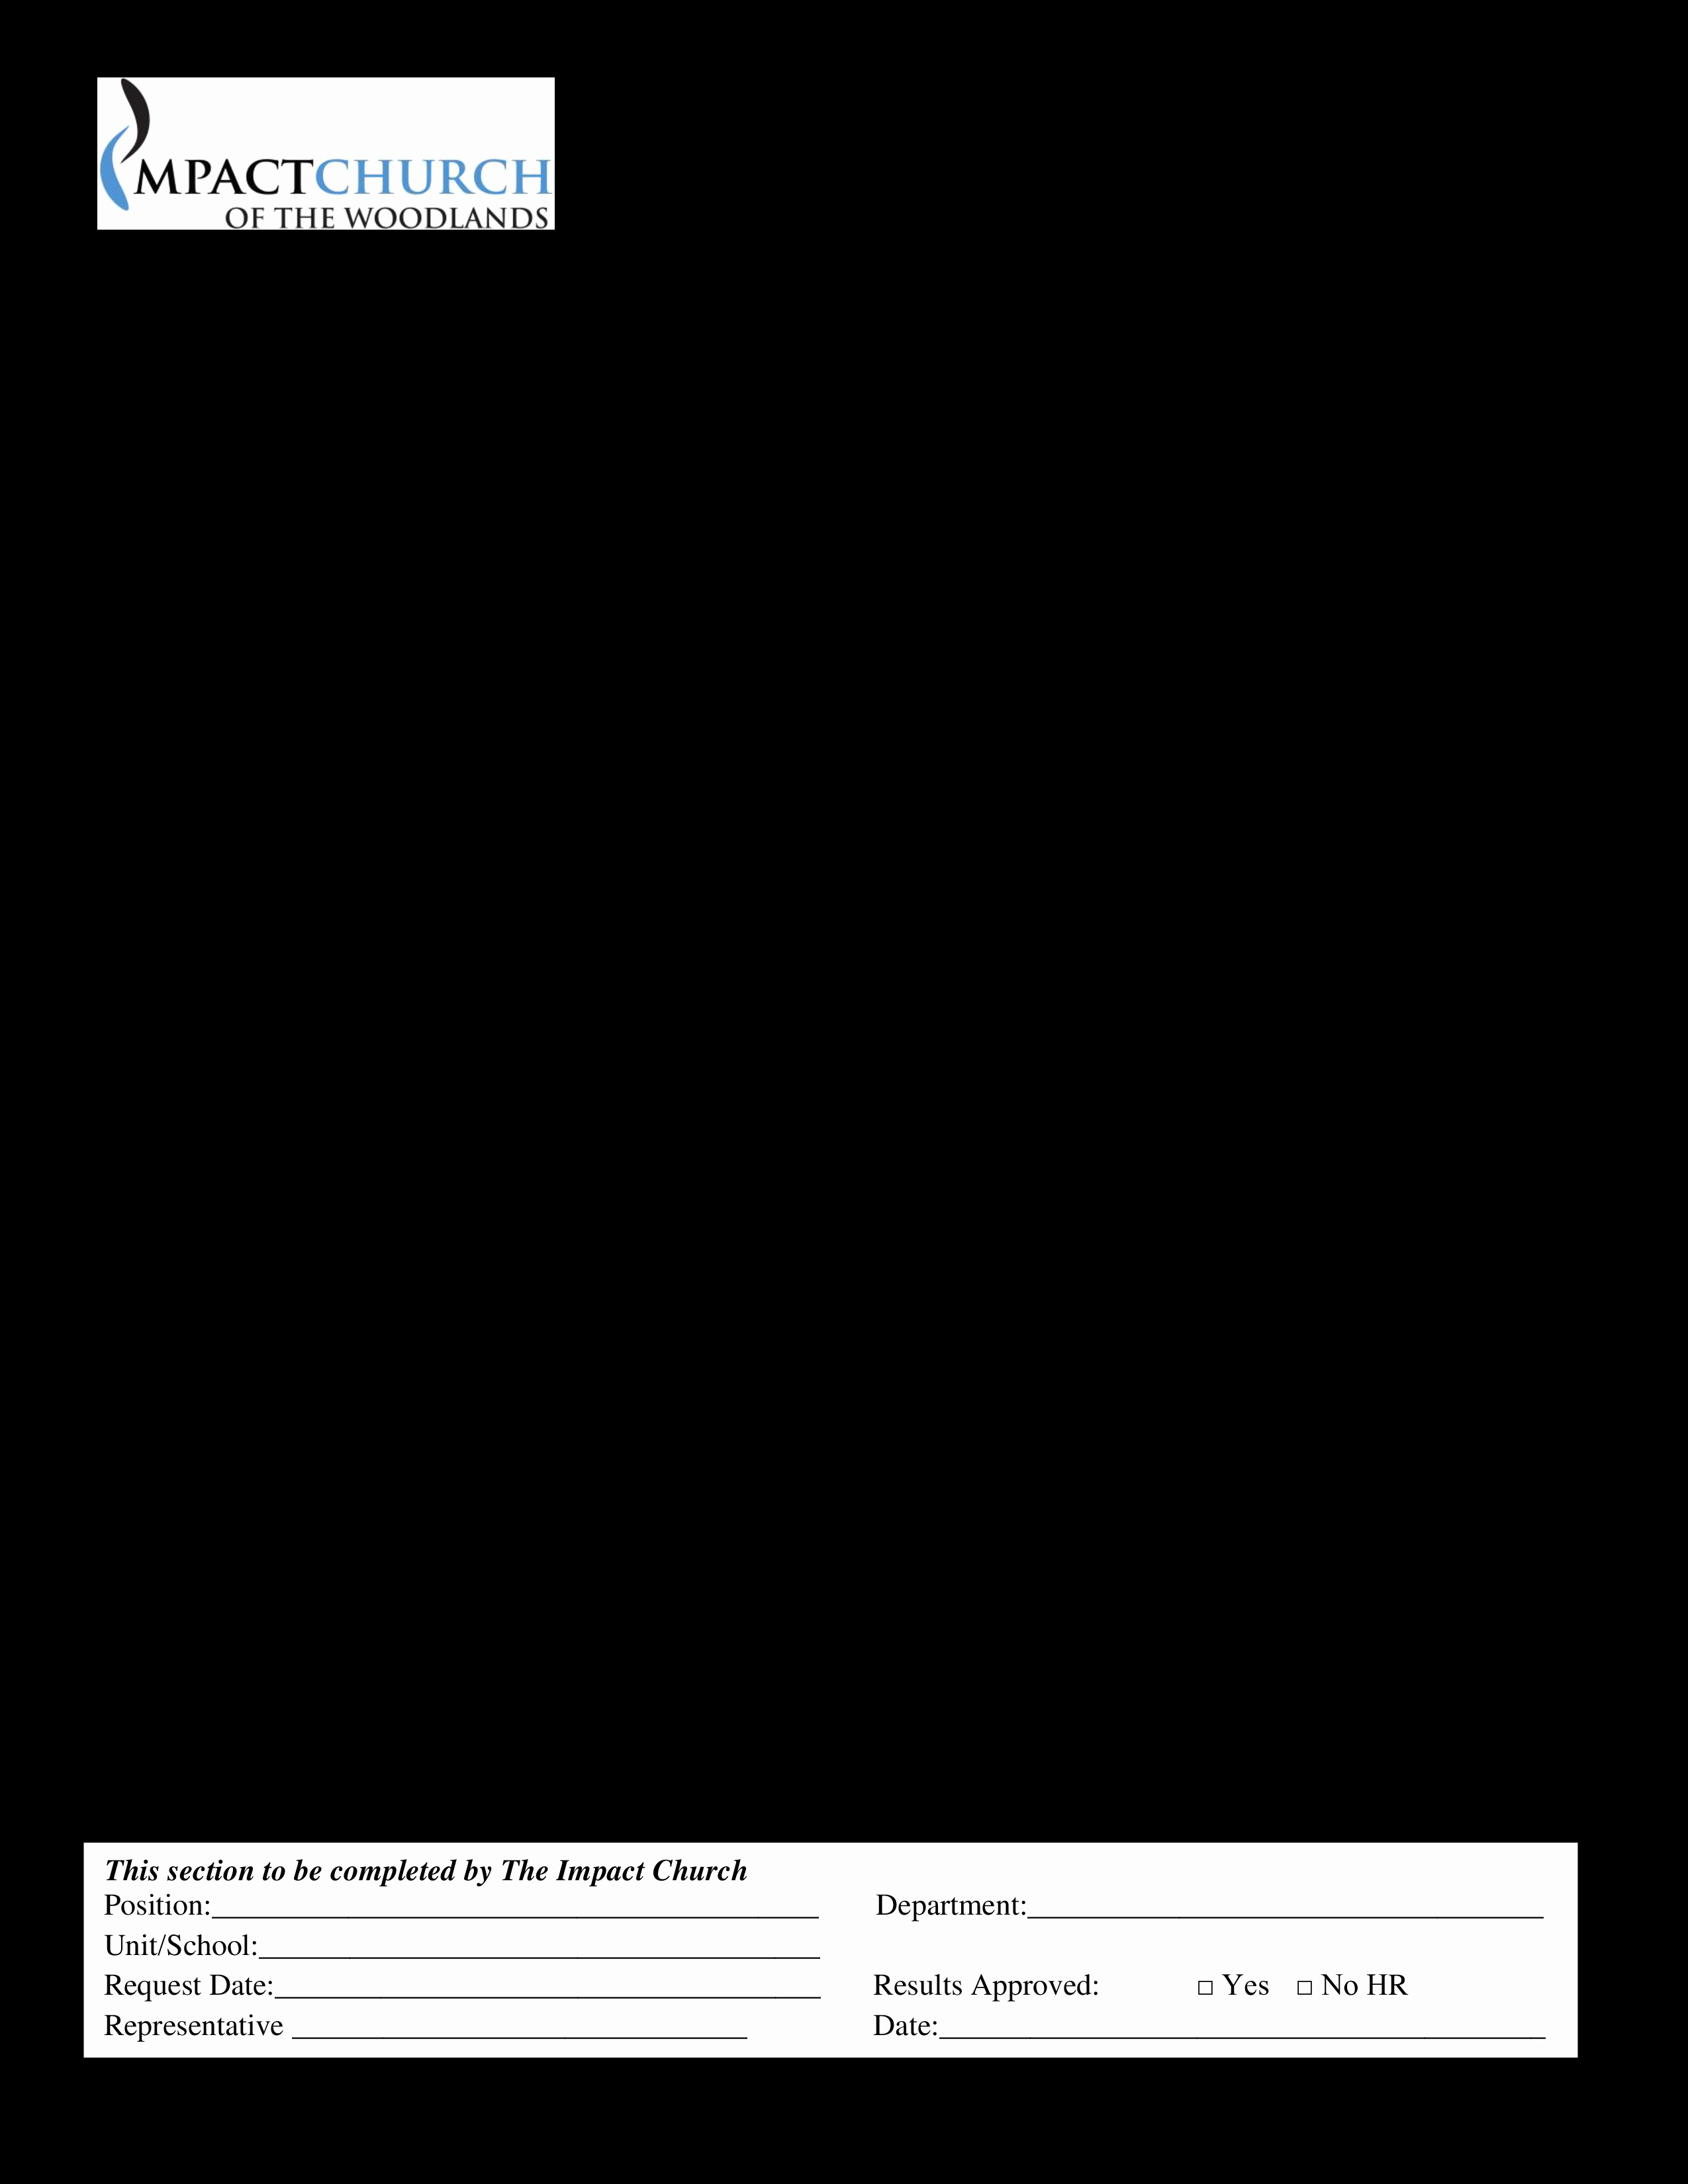 Background Check form Template New Free Criminal Background Check Authorization form